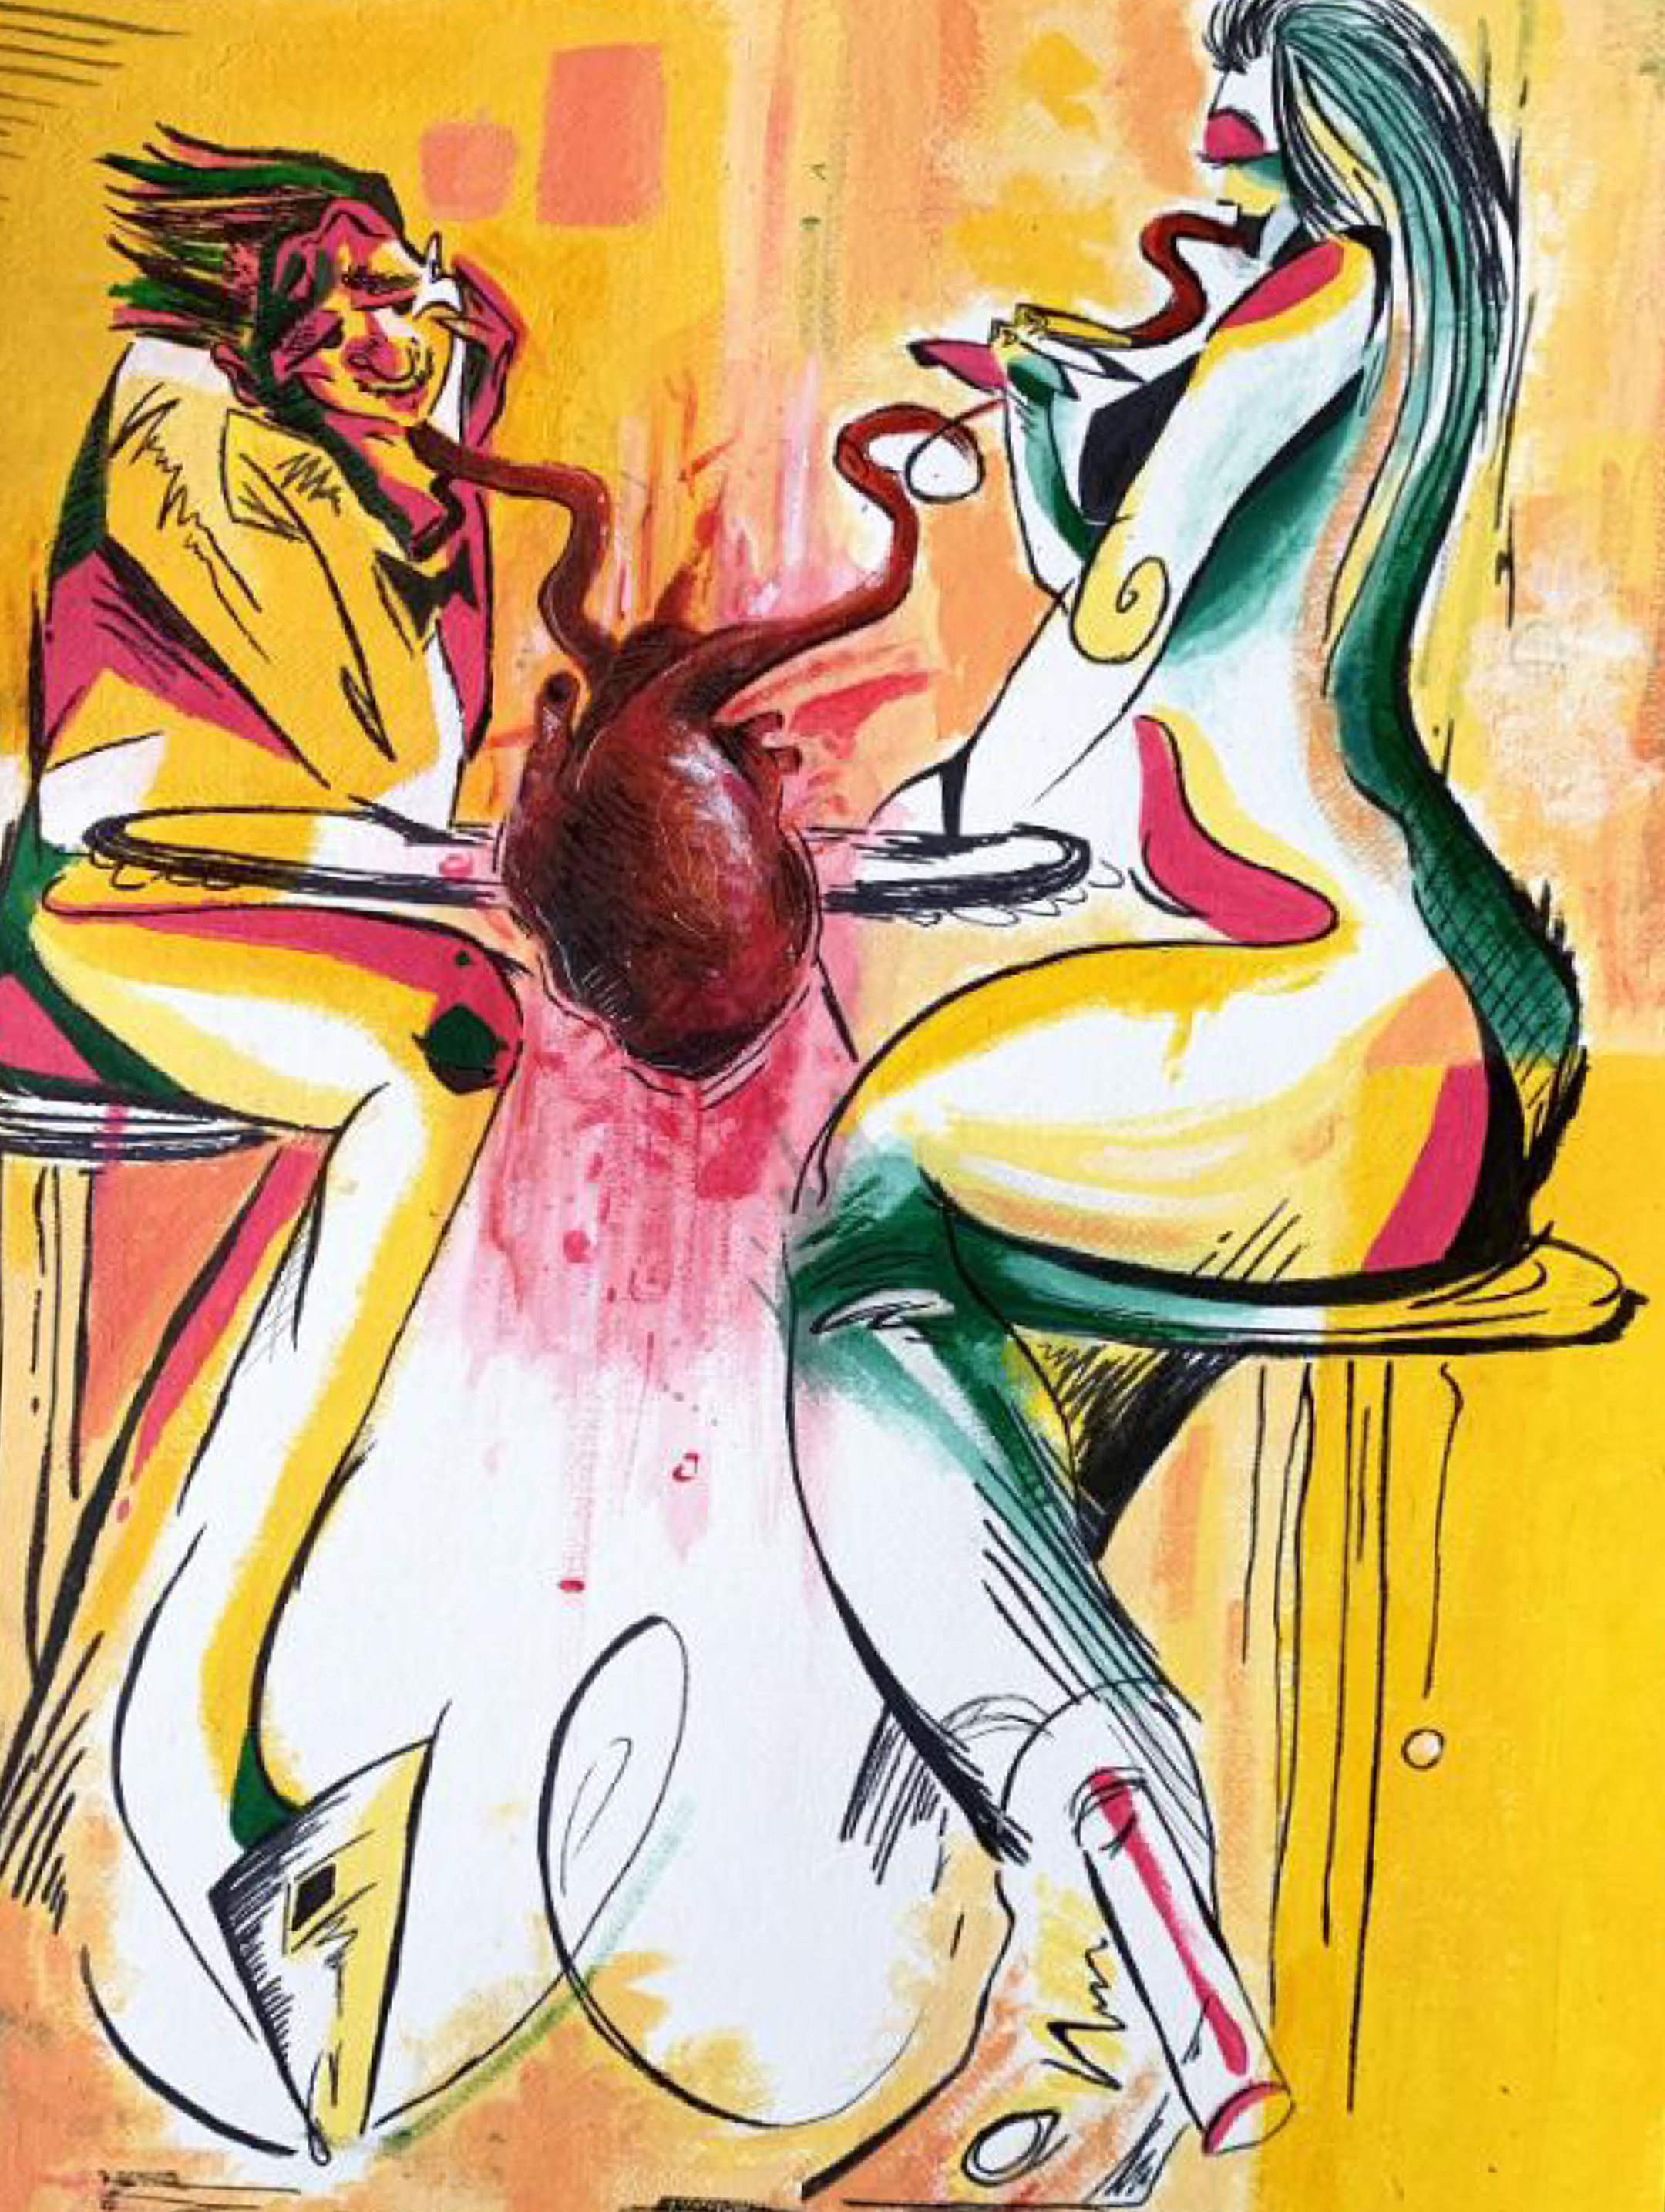 Stylized illustration of a man and a woman sitting at a table sipping from the arteries of a human heart